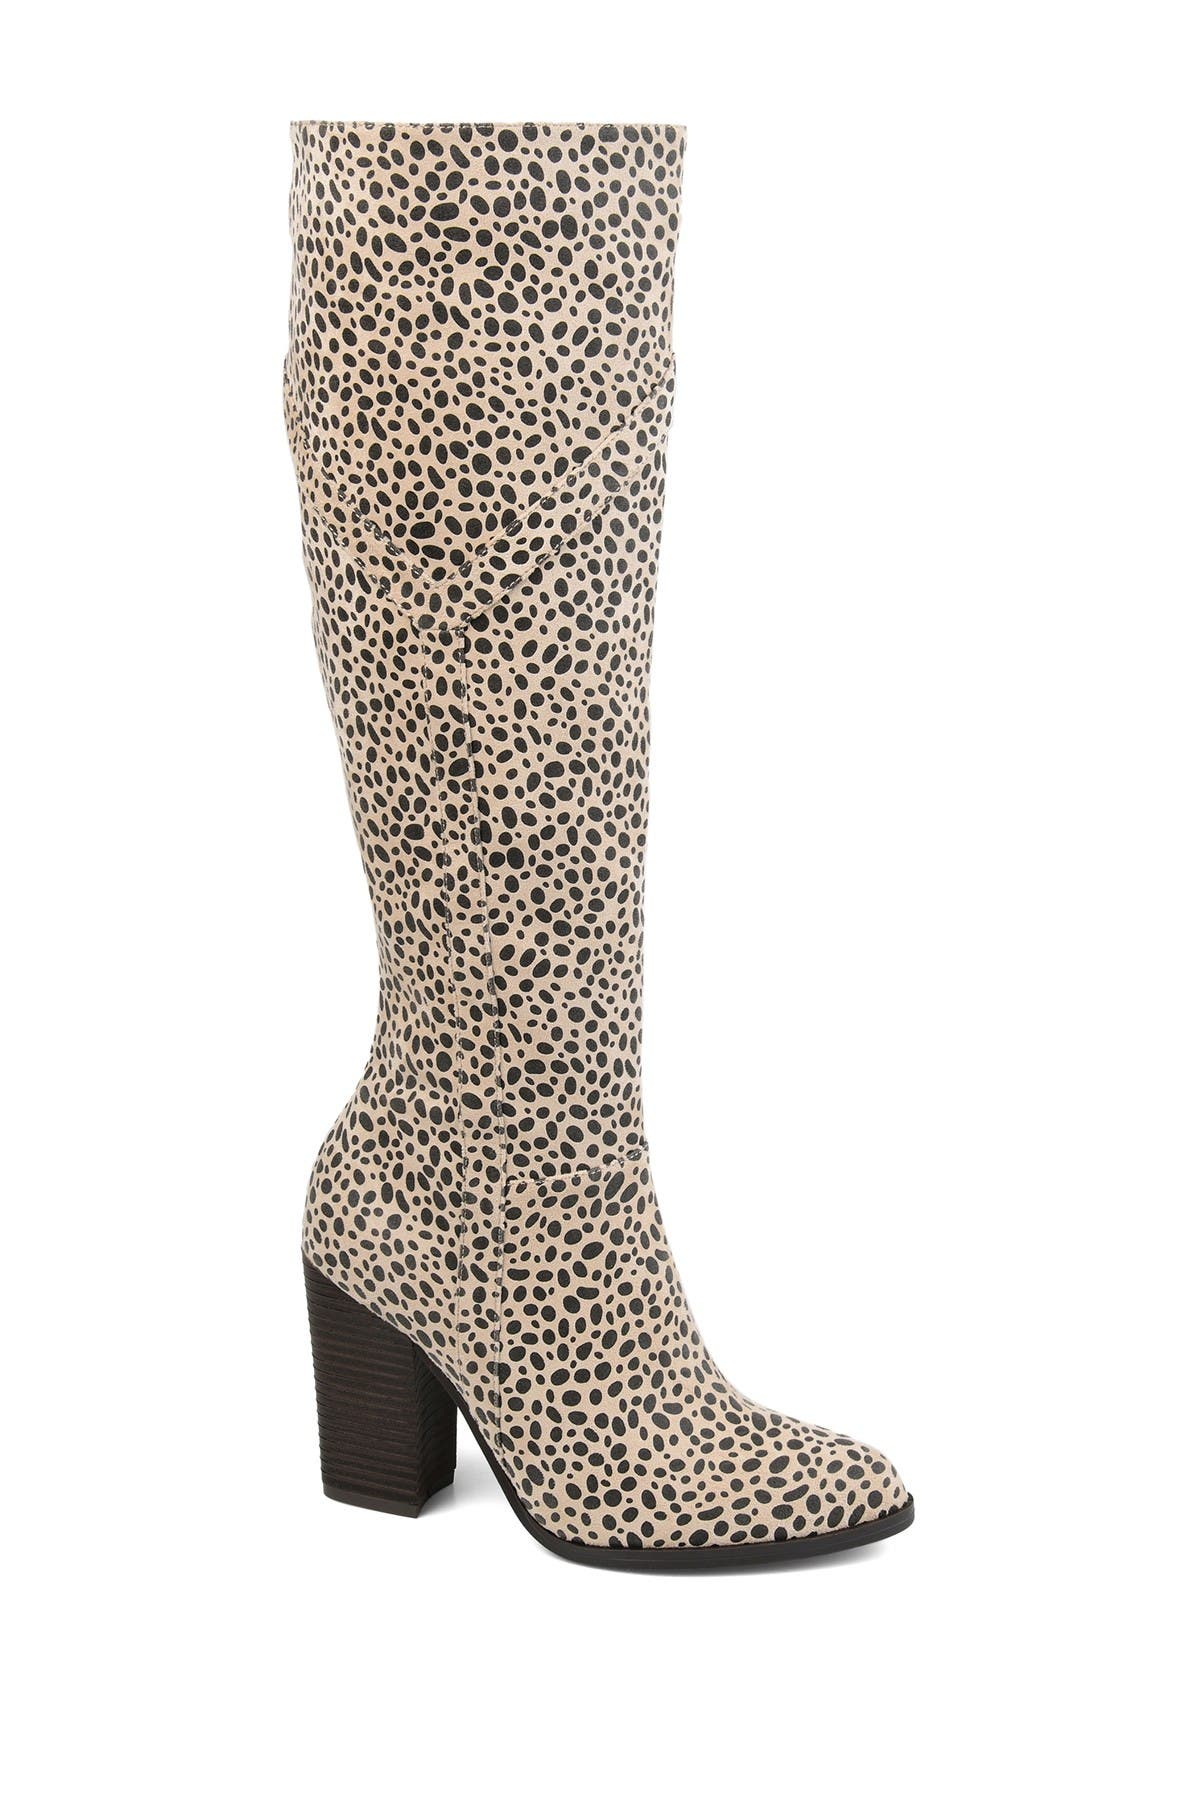 JOURNEE Collection | Kyllie Tall Boot - Extra Wide Calf | Nordstrom Rack